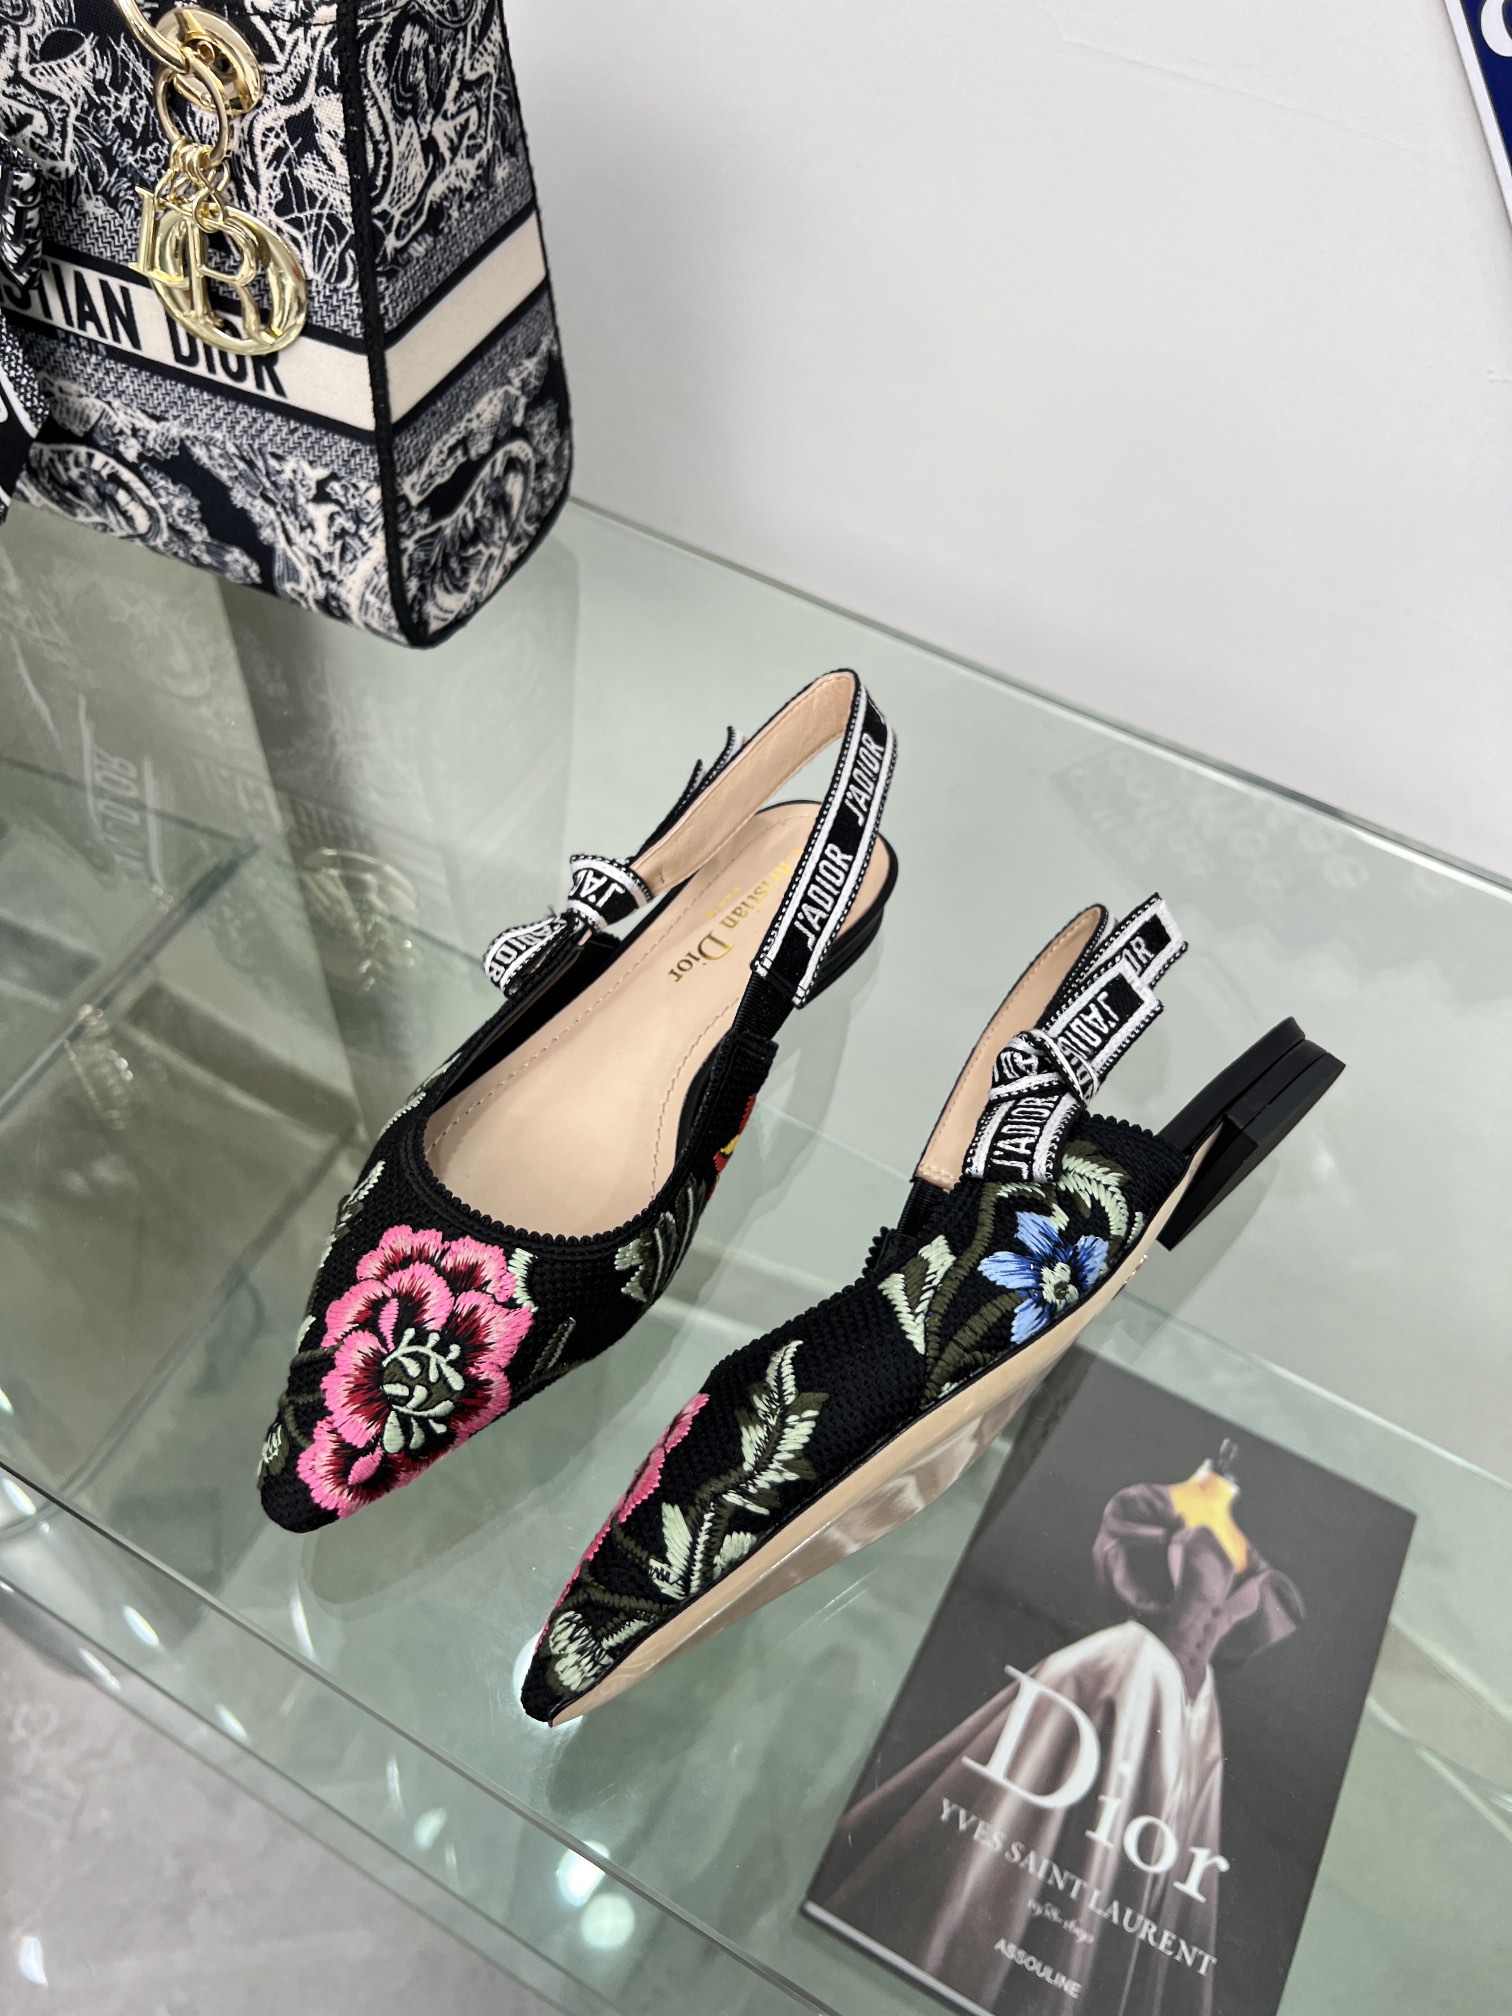 Dior Shoes High Heel Pumps Sandals Embroidery Genuine Leather Sheepskin Spring/Summer Collection